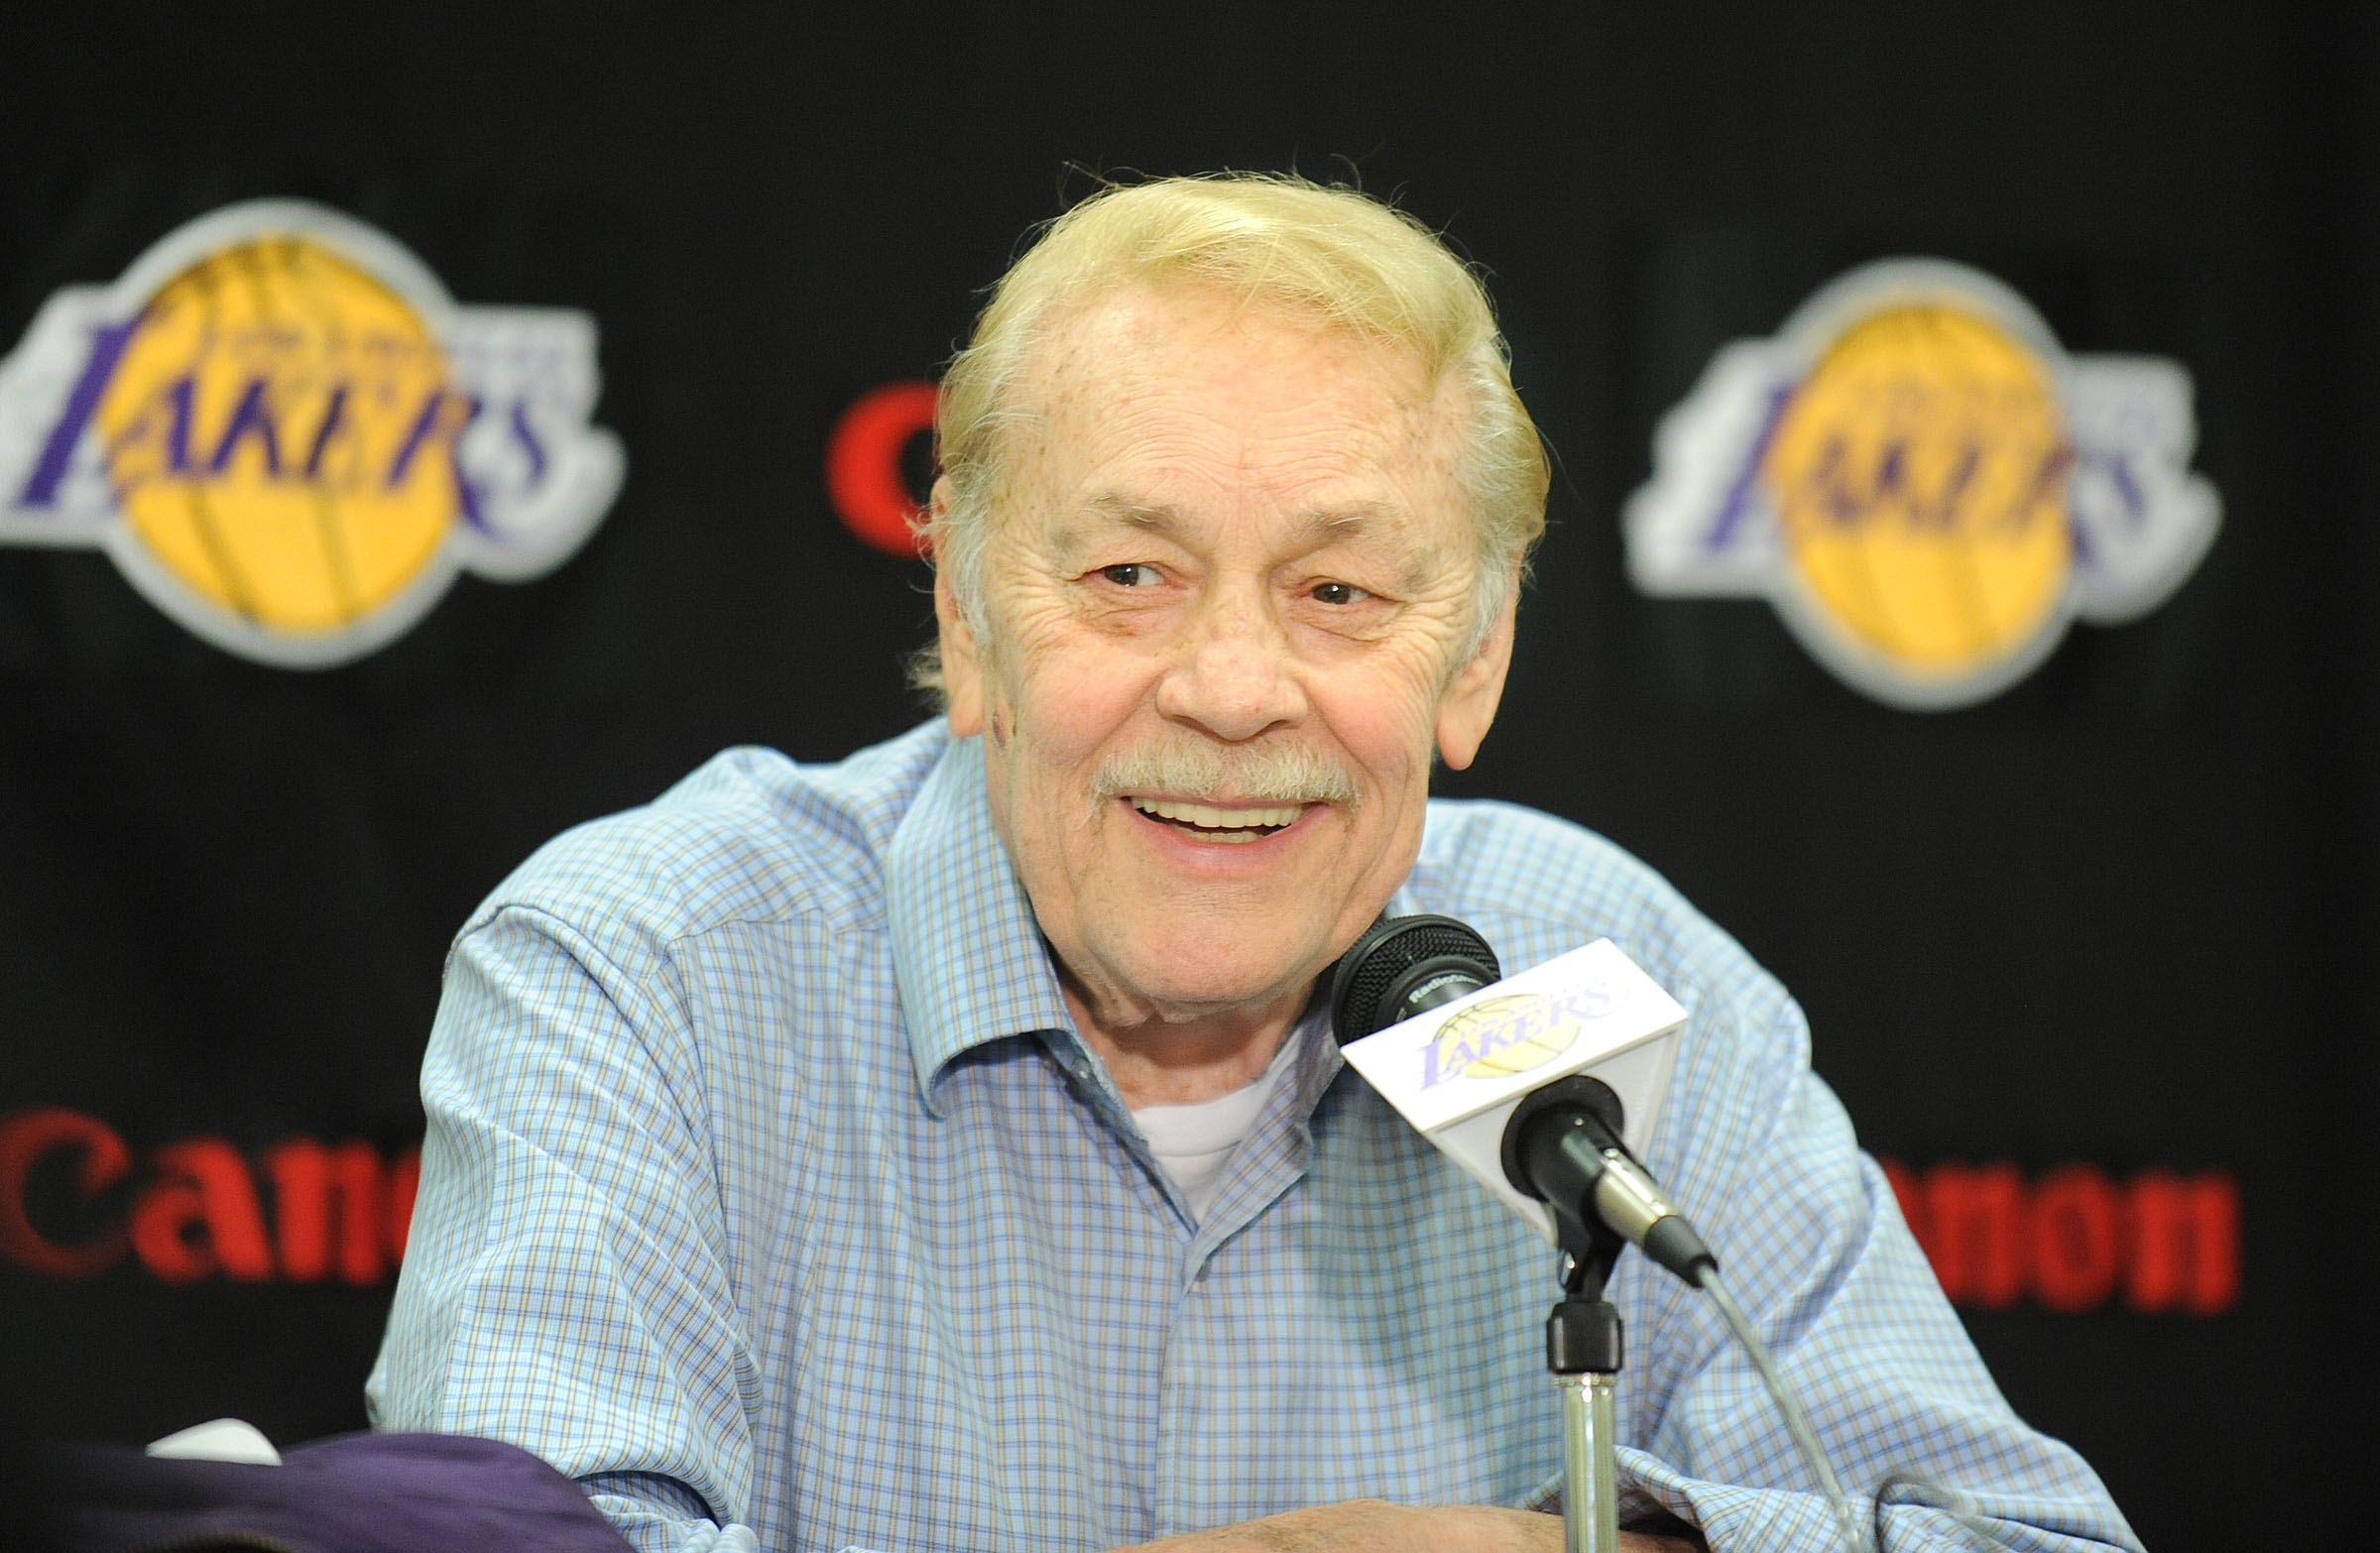 Jerry Buss: Longtime Los Angeles Lakers owner leaves condo and